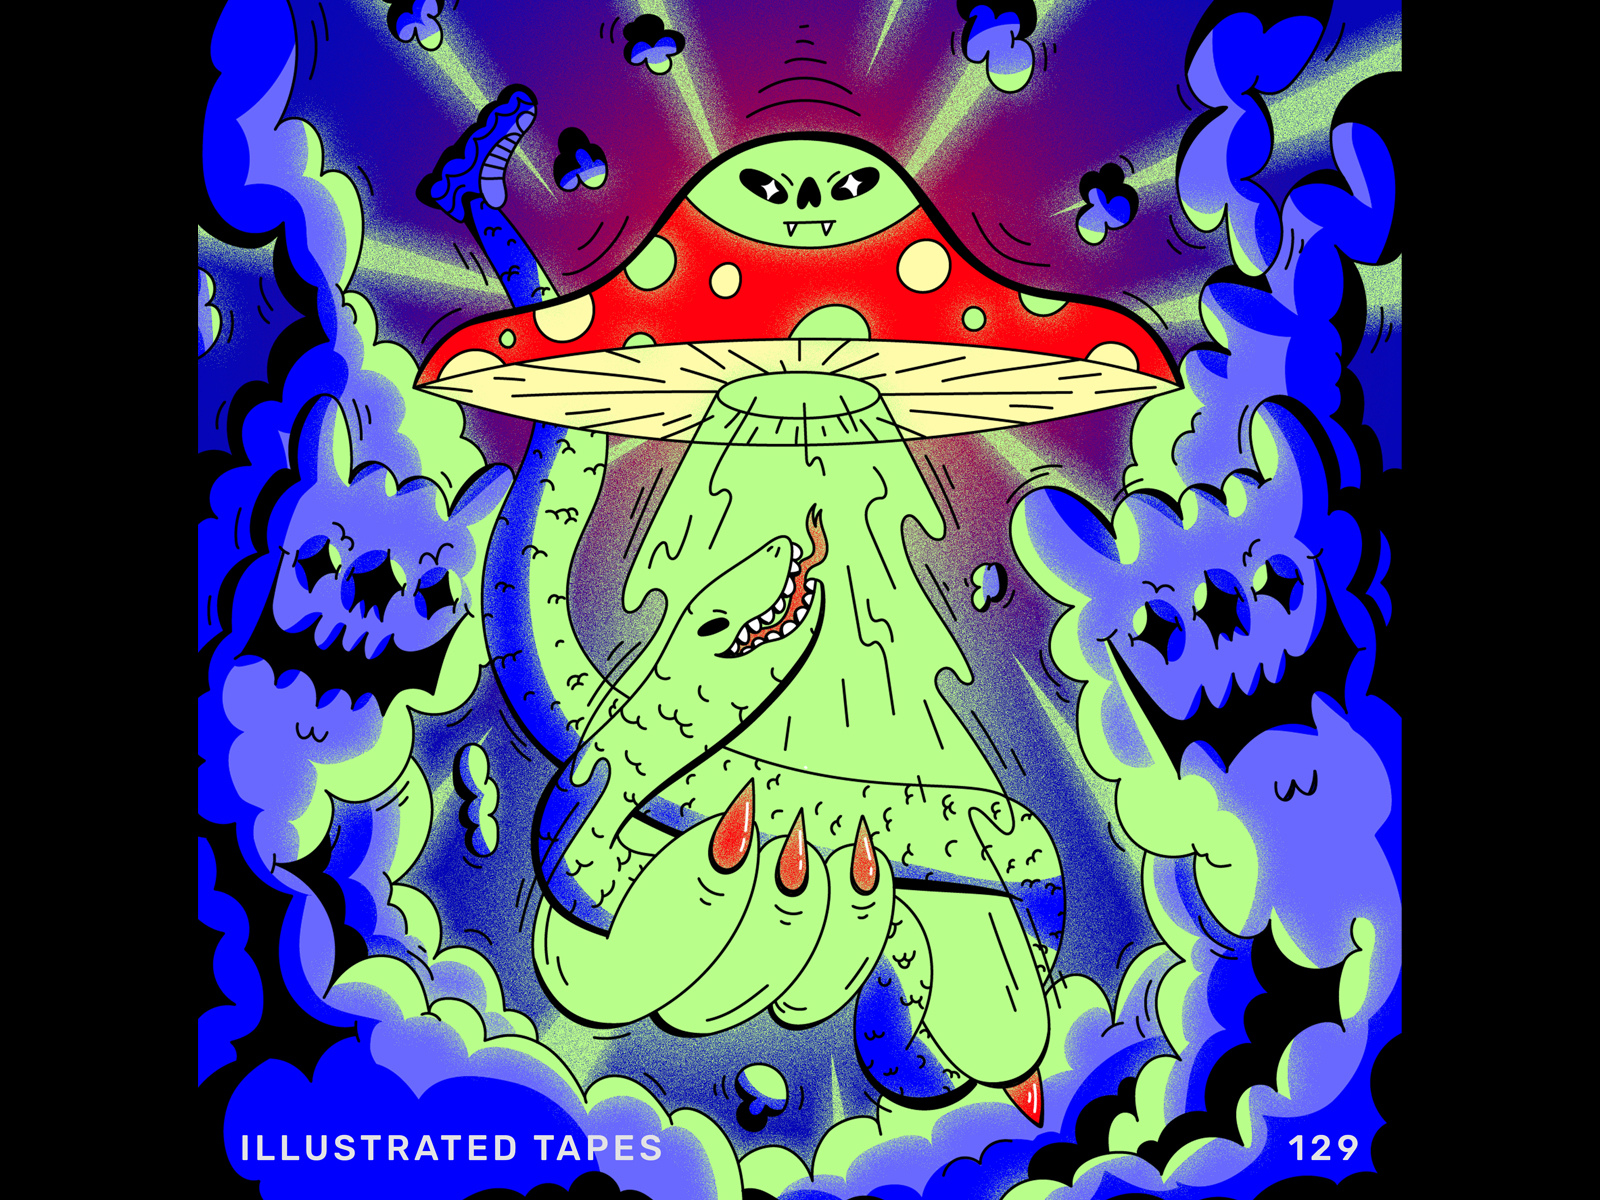 I WANT TO BELIEVE abduction album art aliens cover art digital illustration mixtape mushroom music occult playlist psychedelic shrooms smoke snake sneakers spotify trippy ufo vector